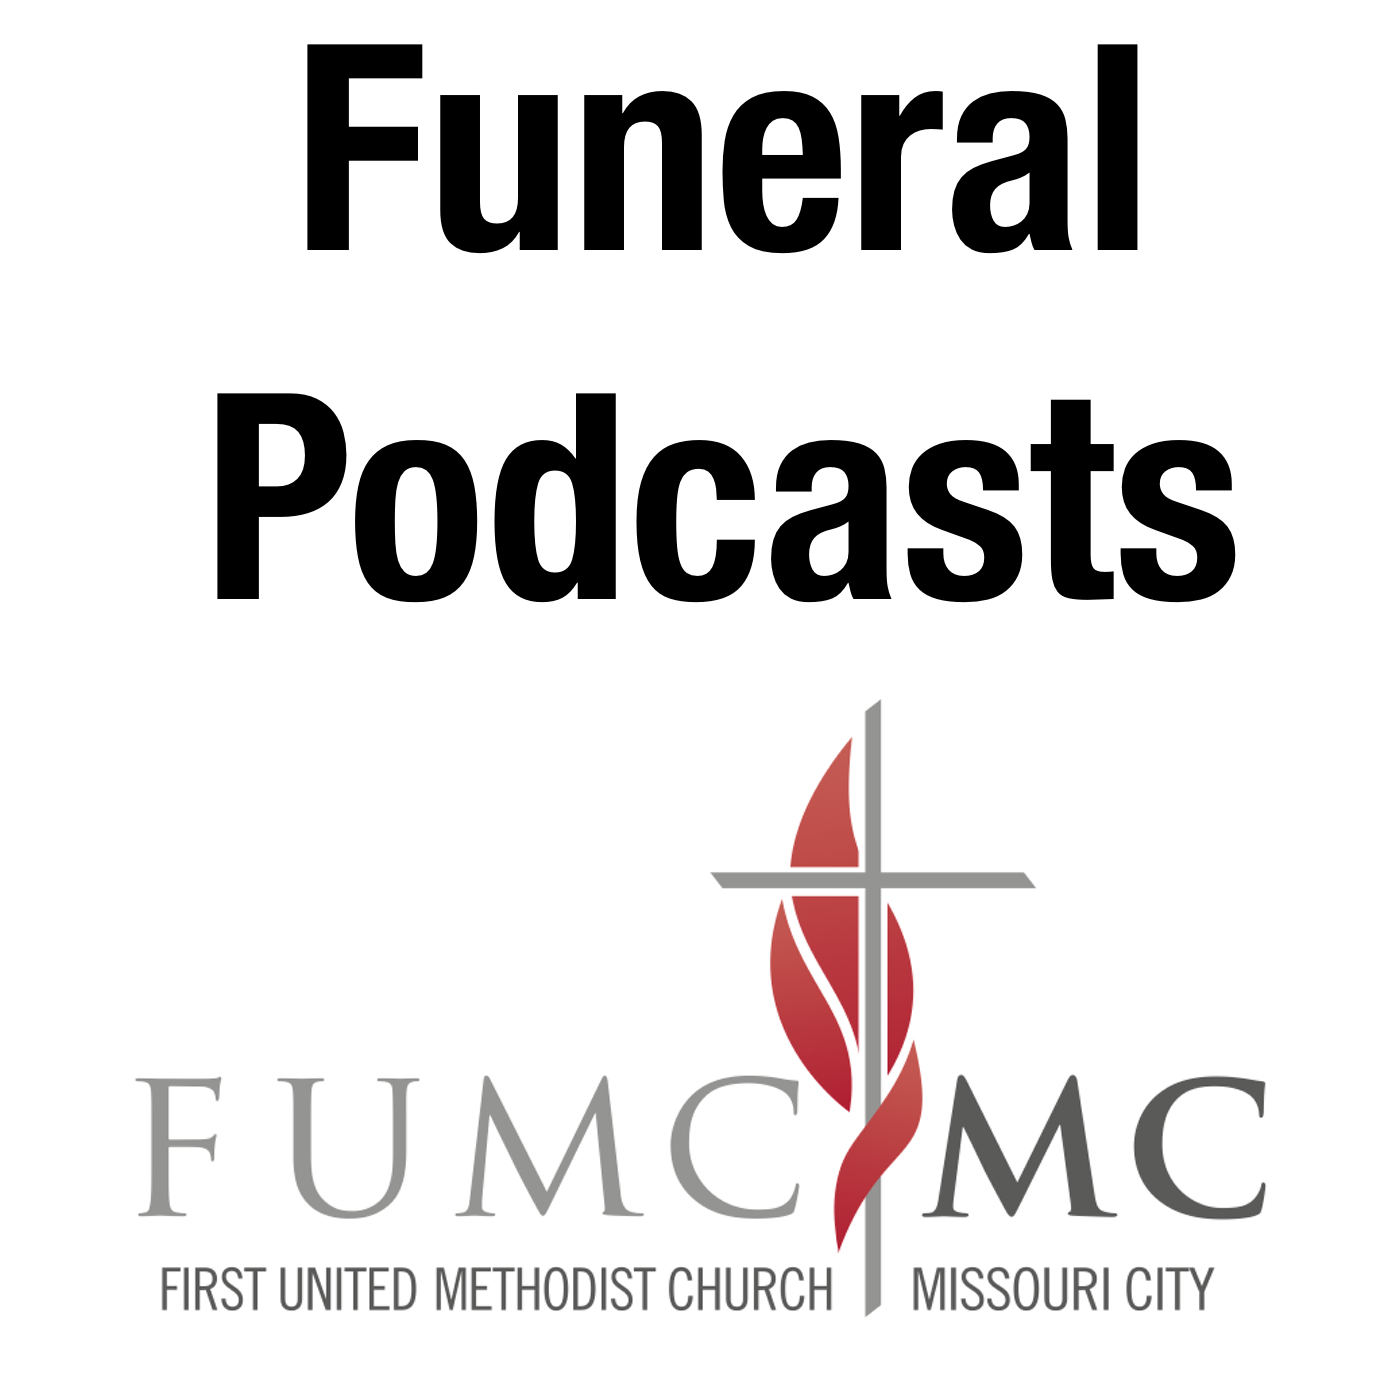 FUMCMC Funeral Podcasts